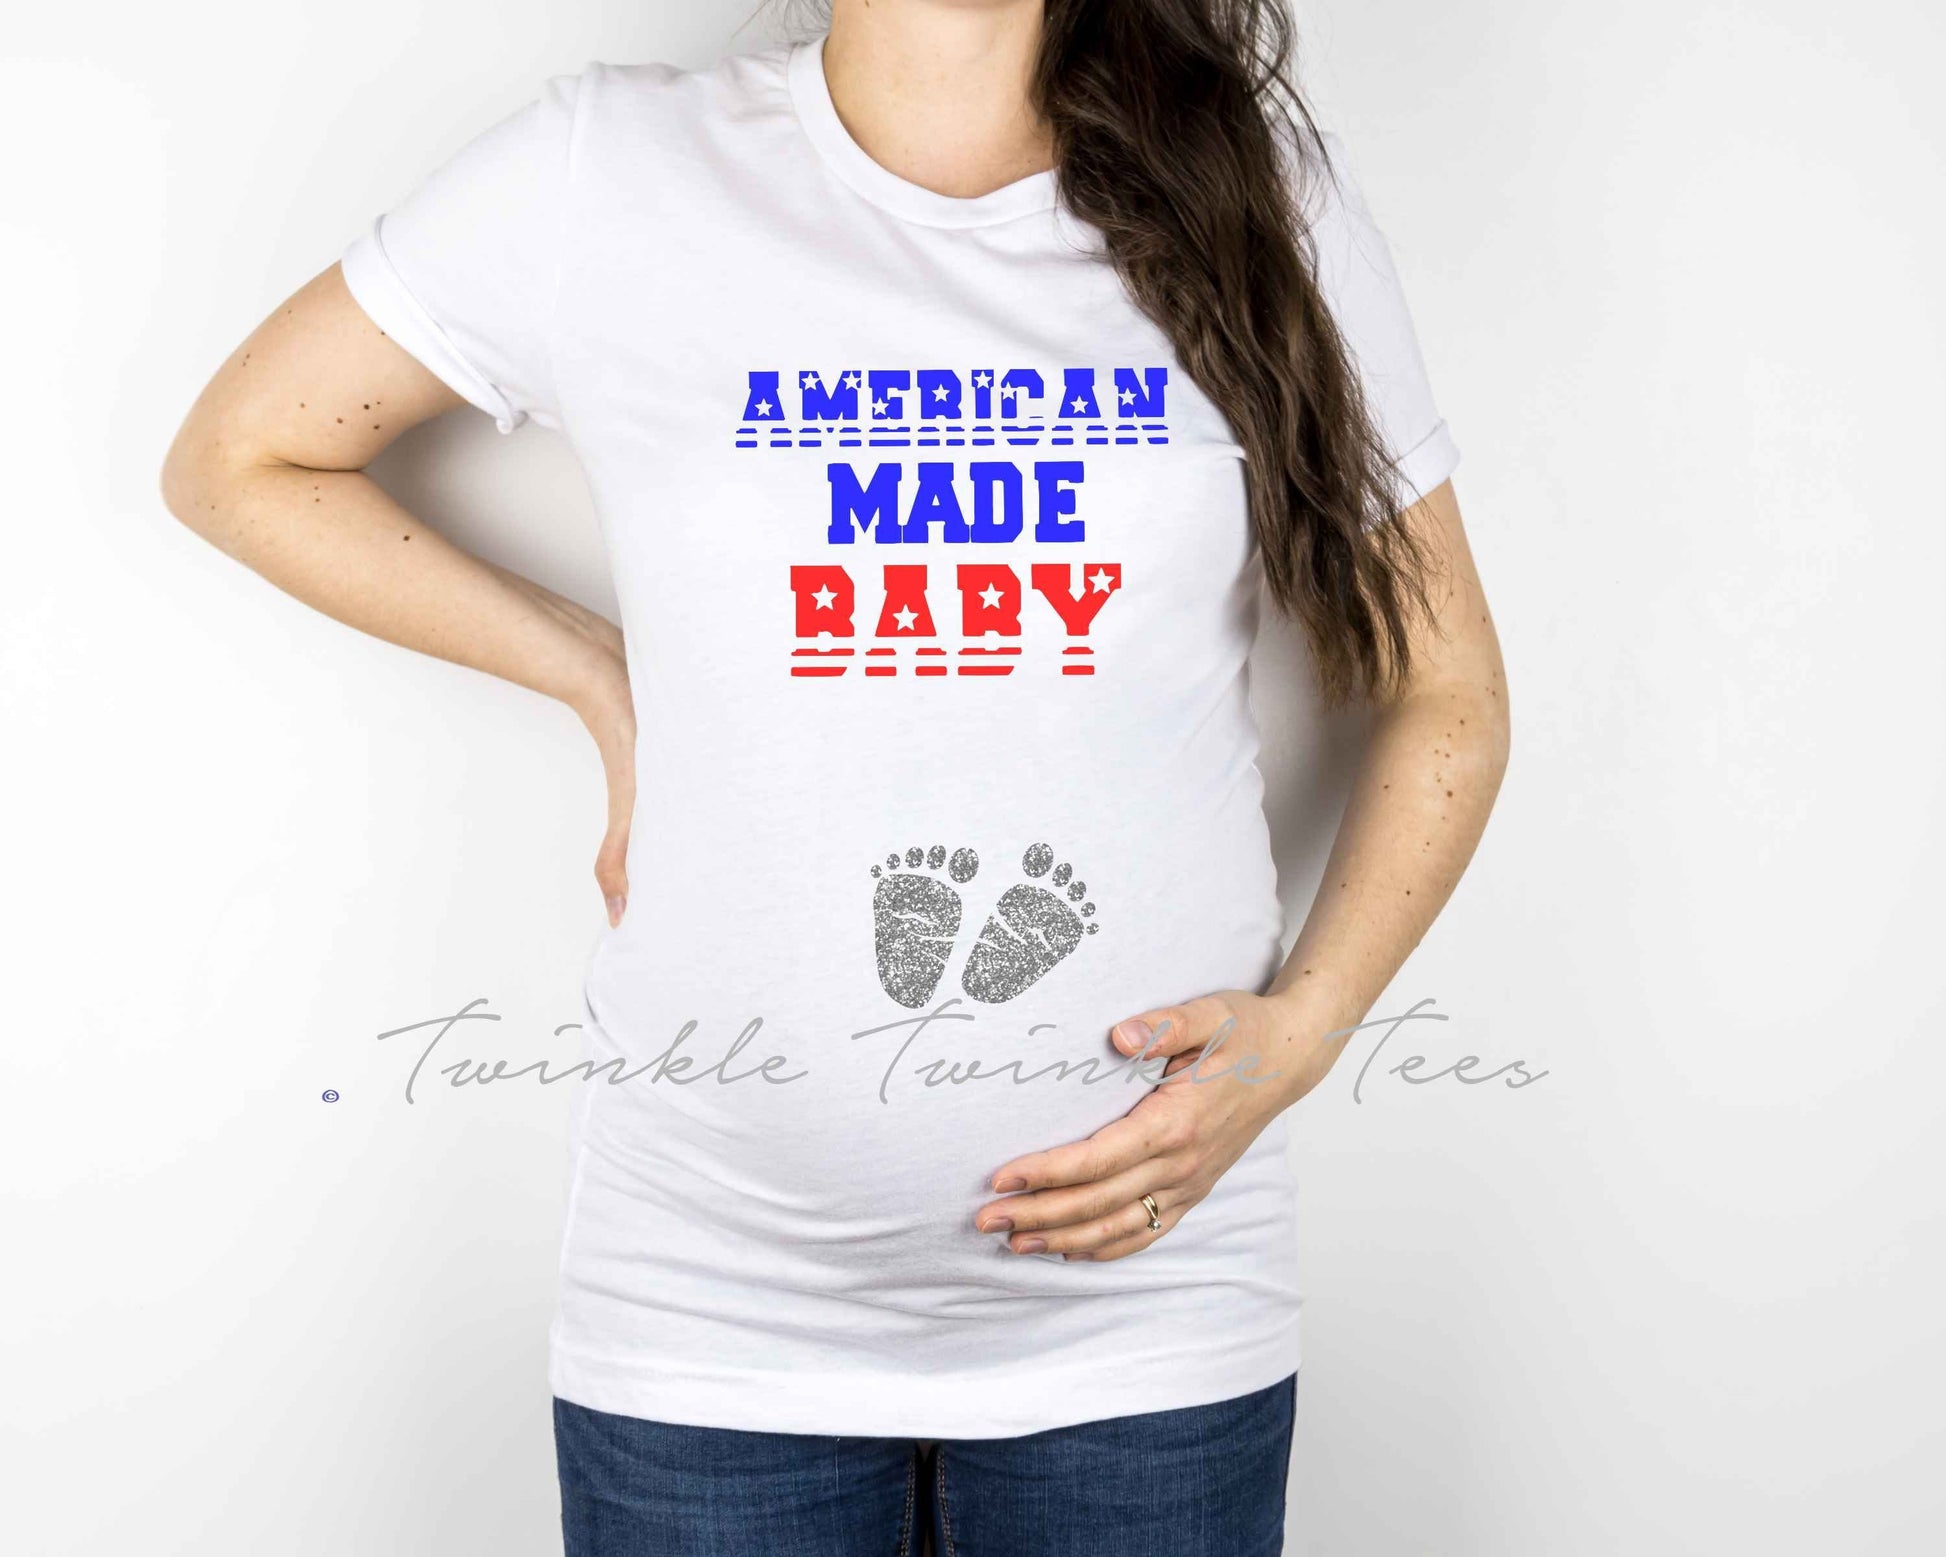 American Made Baby t-shirt - 4th of July pregnancy announcement